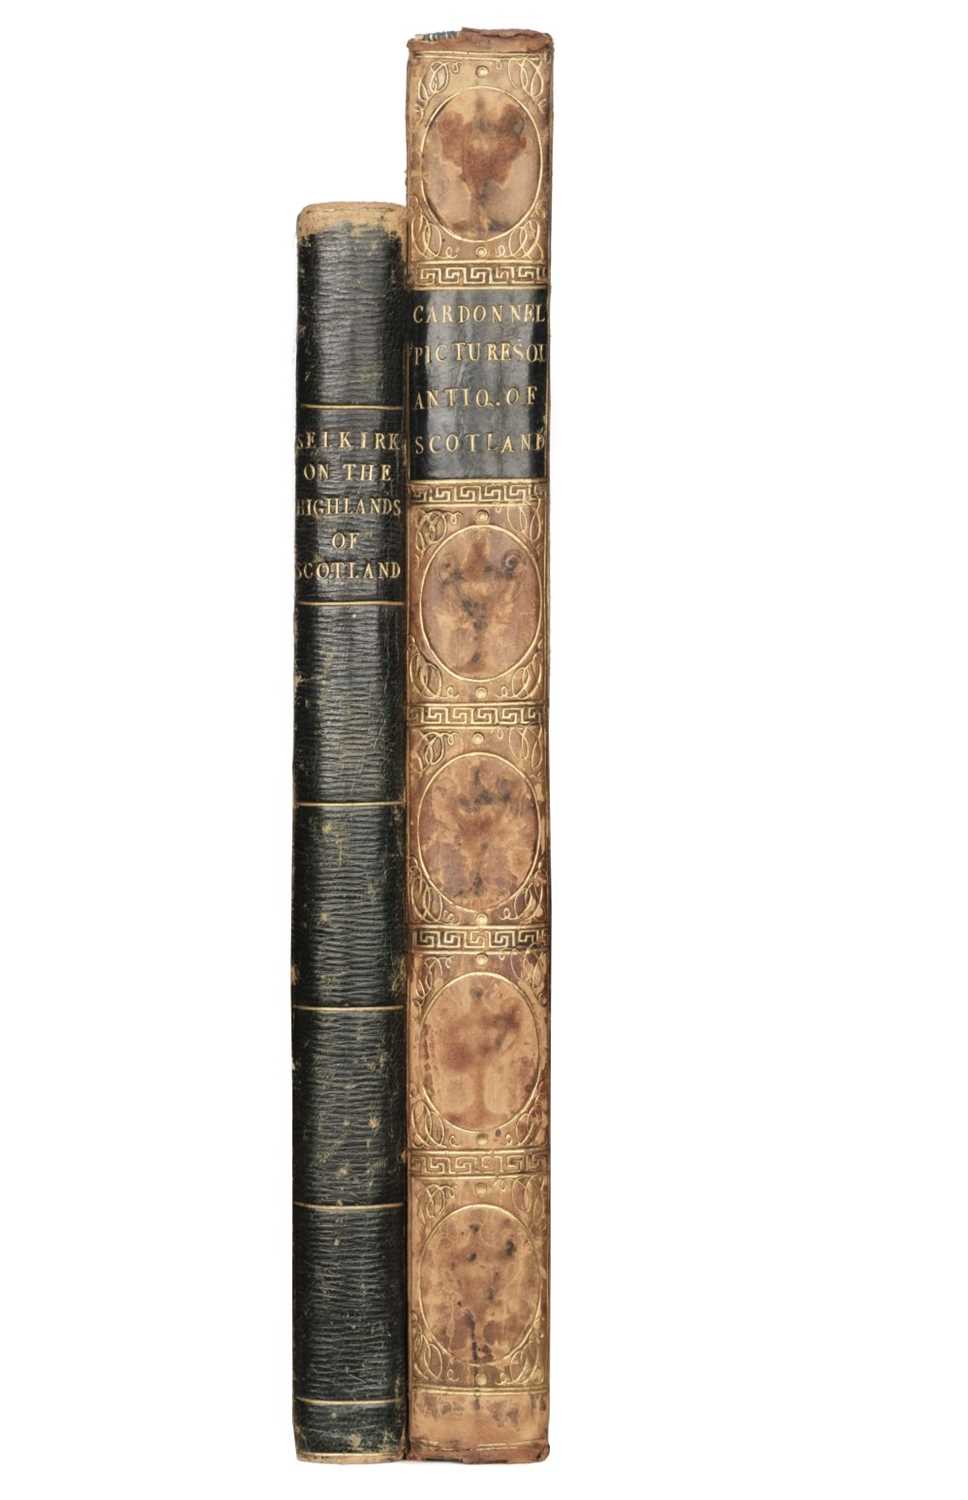 Lot 44 - Selkirk (Earl of) Highlands of Scotland, 1st edition, 1805